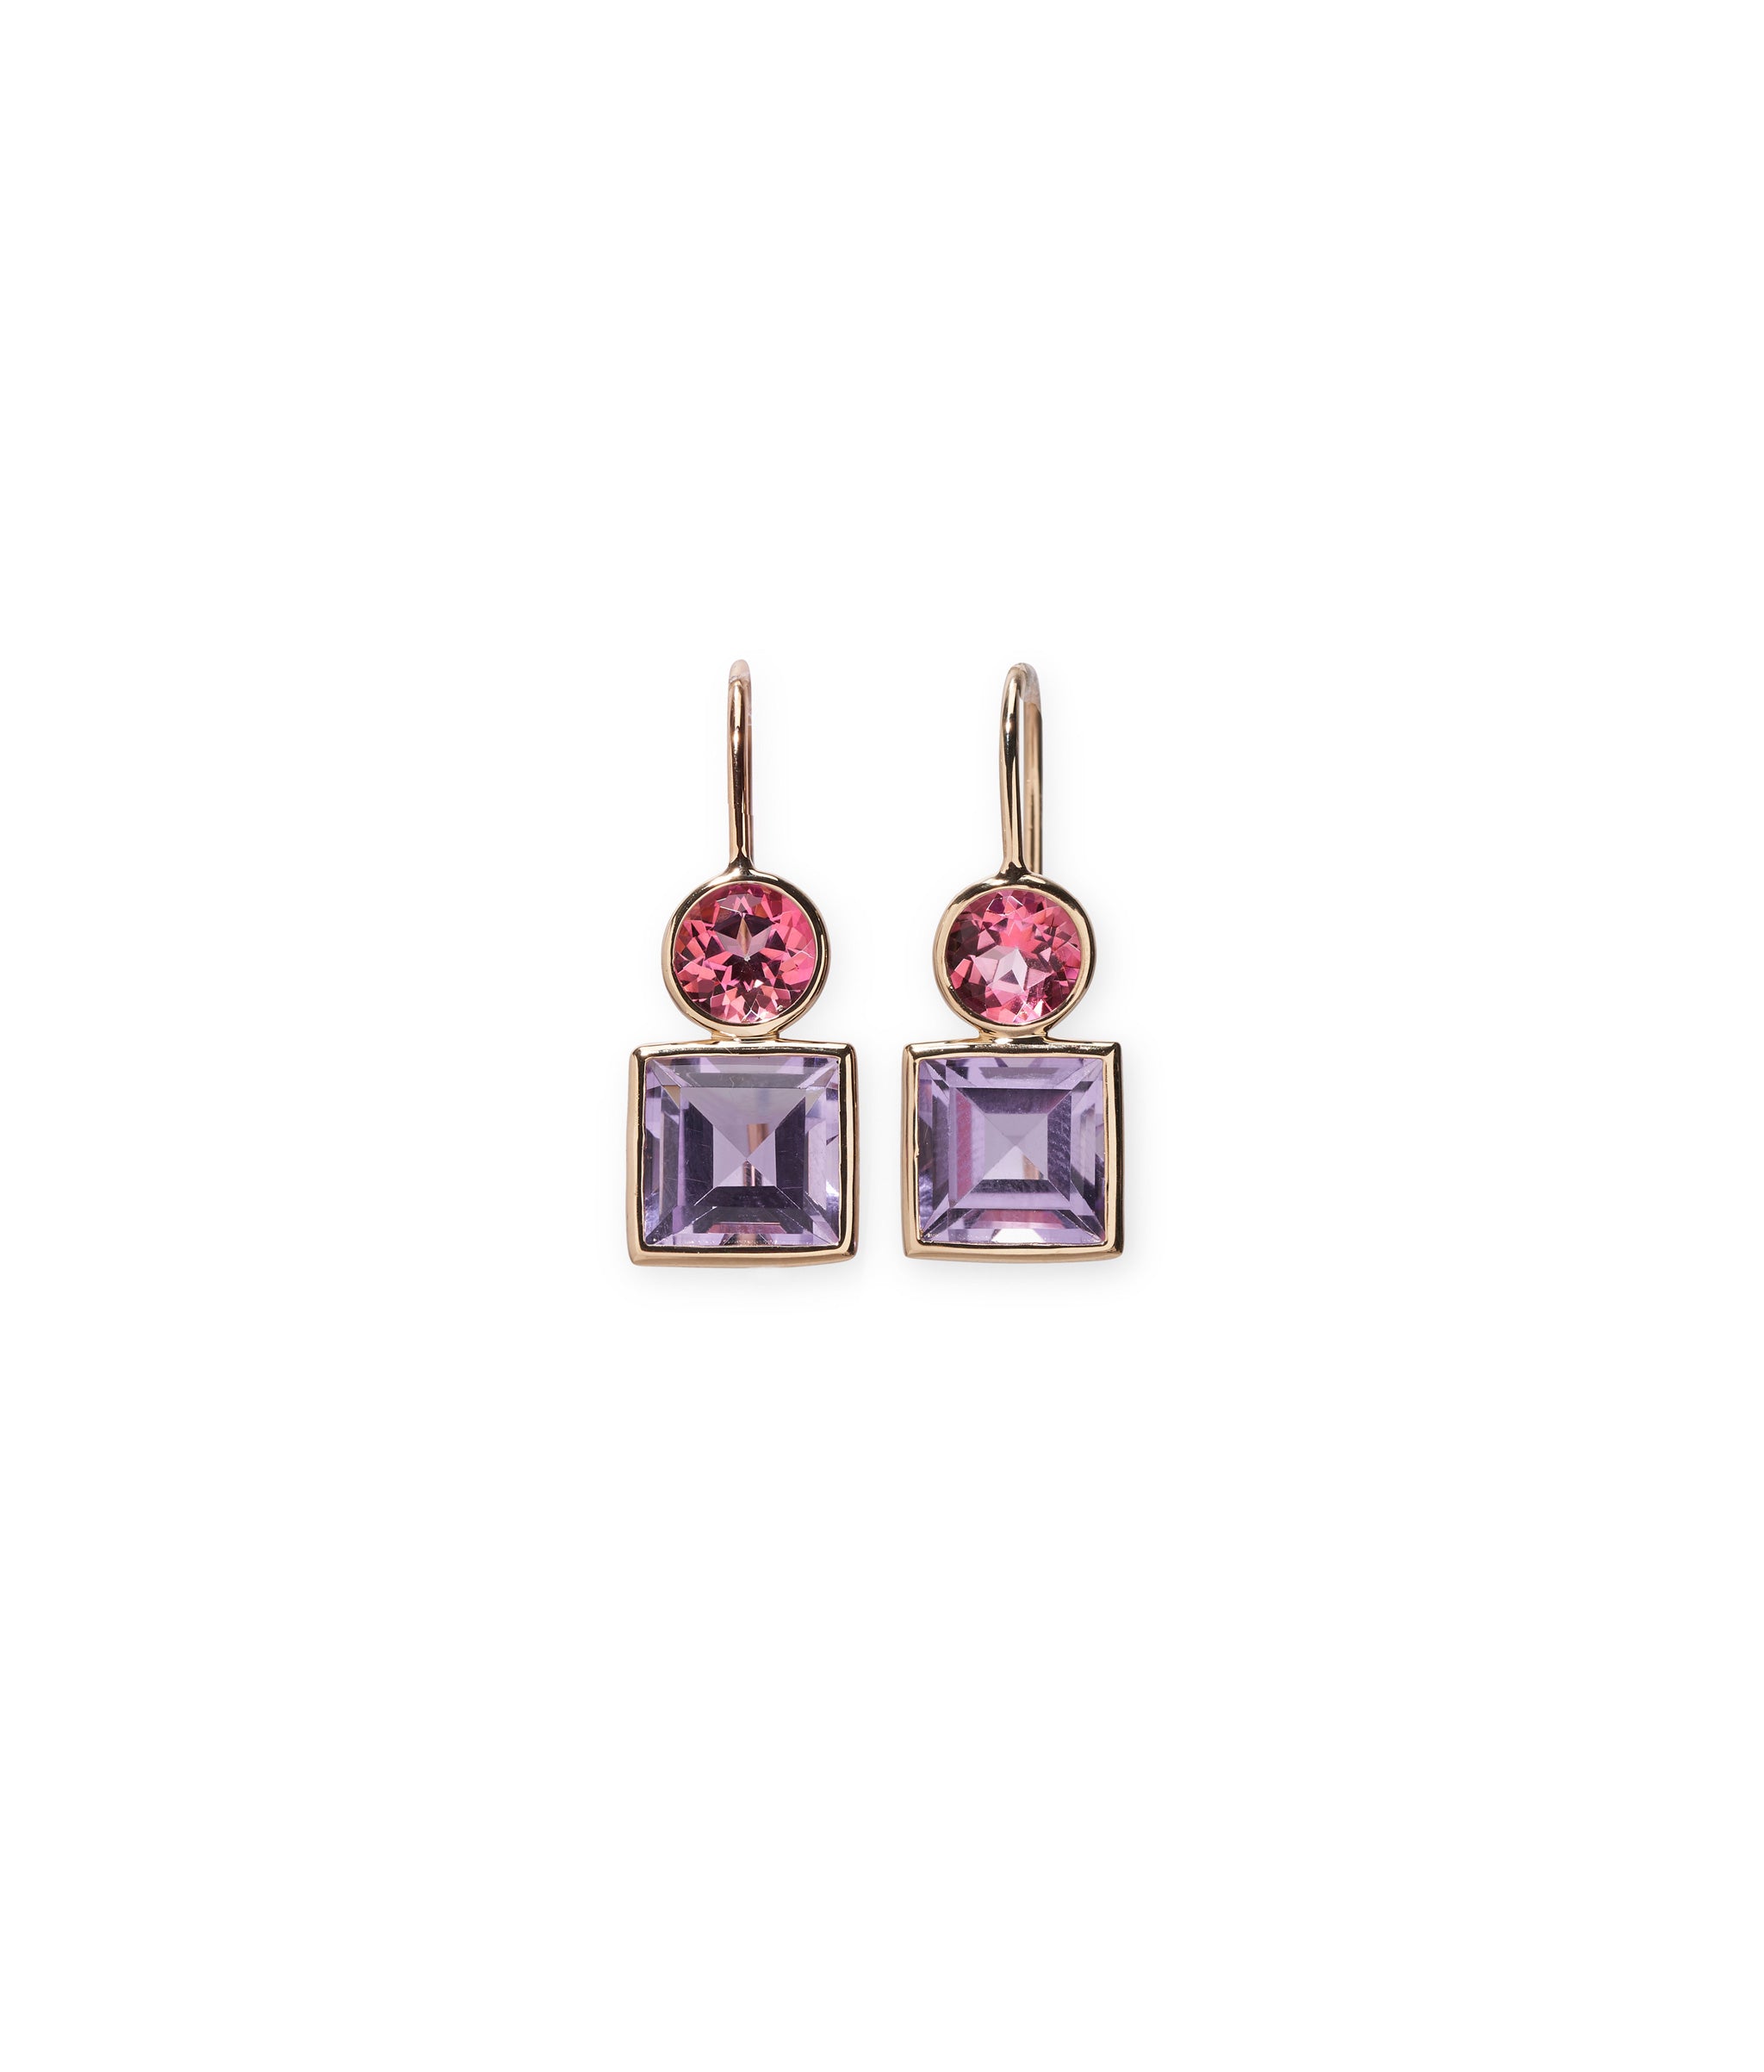 14k Pastille Earrings in Pink Topaz & Amethyst. Fine gold earwires with faceted round pink and square purple stones.